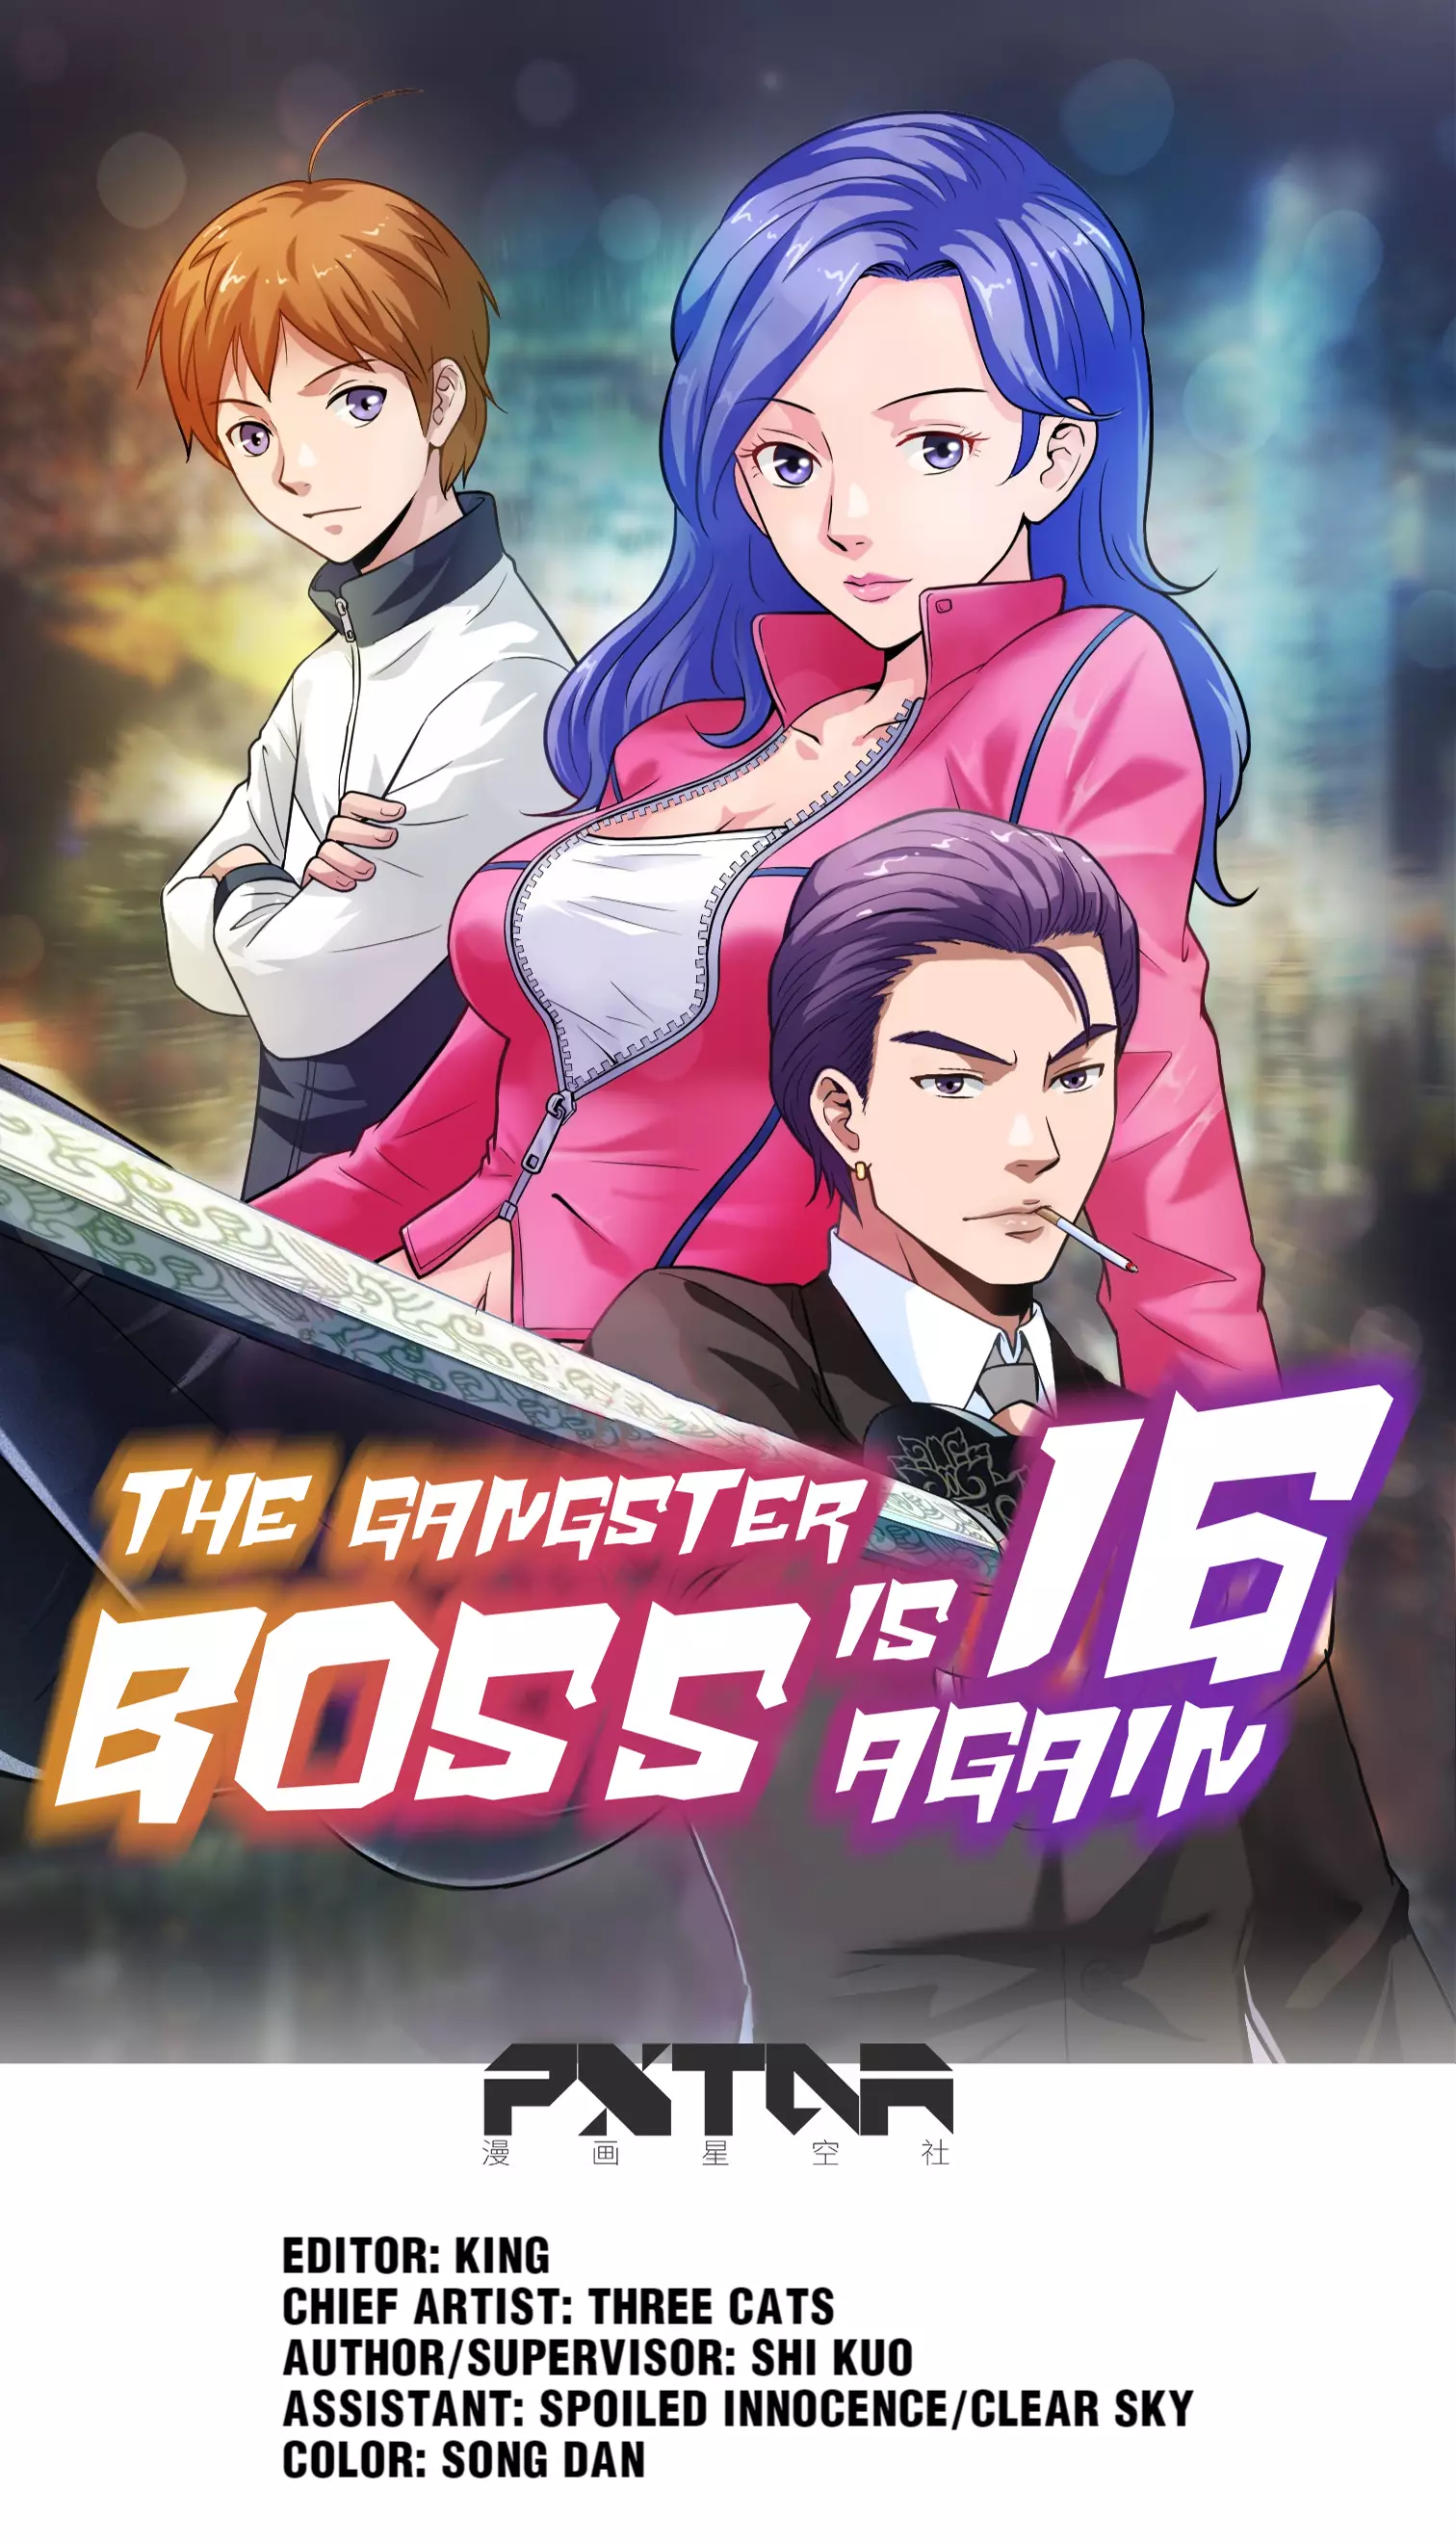 The Gangster Boss Is 16 Again - 14 page 1-836d6d8e